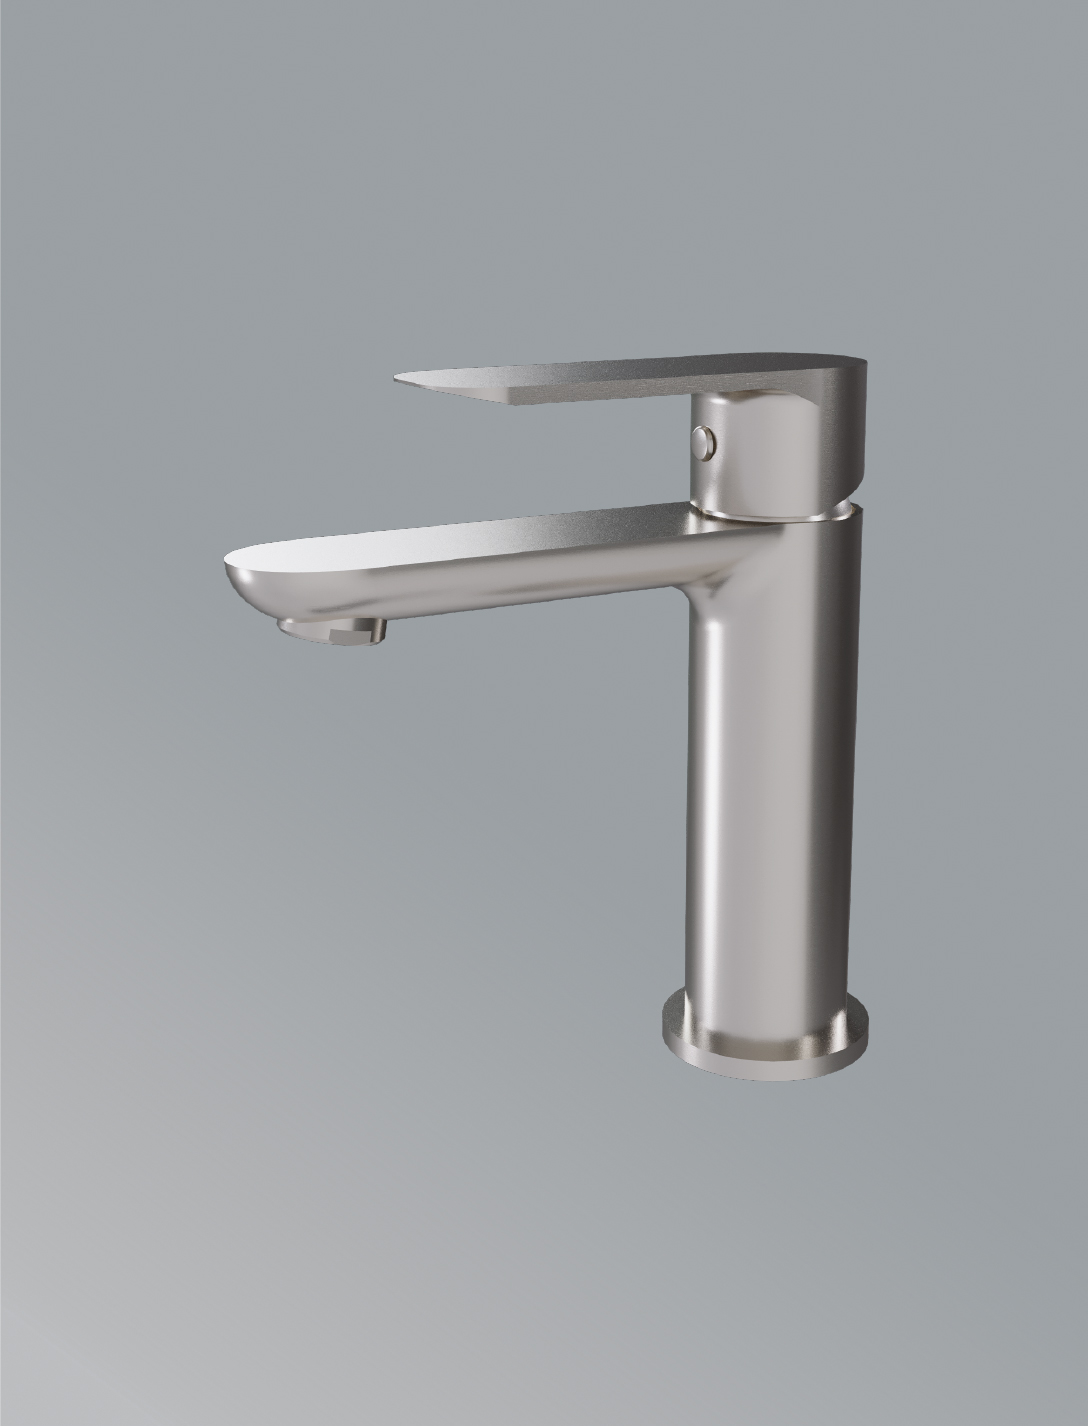   Single Control Basin Faucet In Brushed Nickel